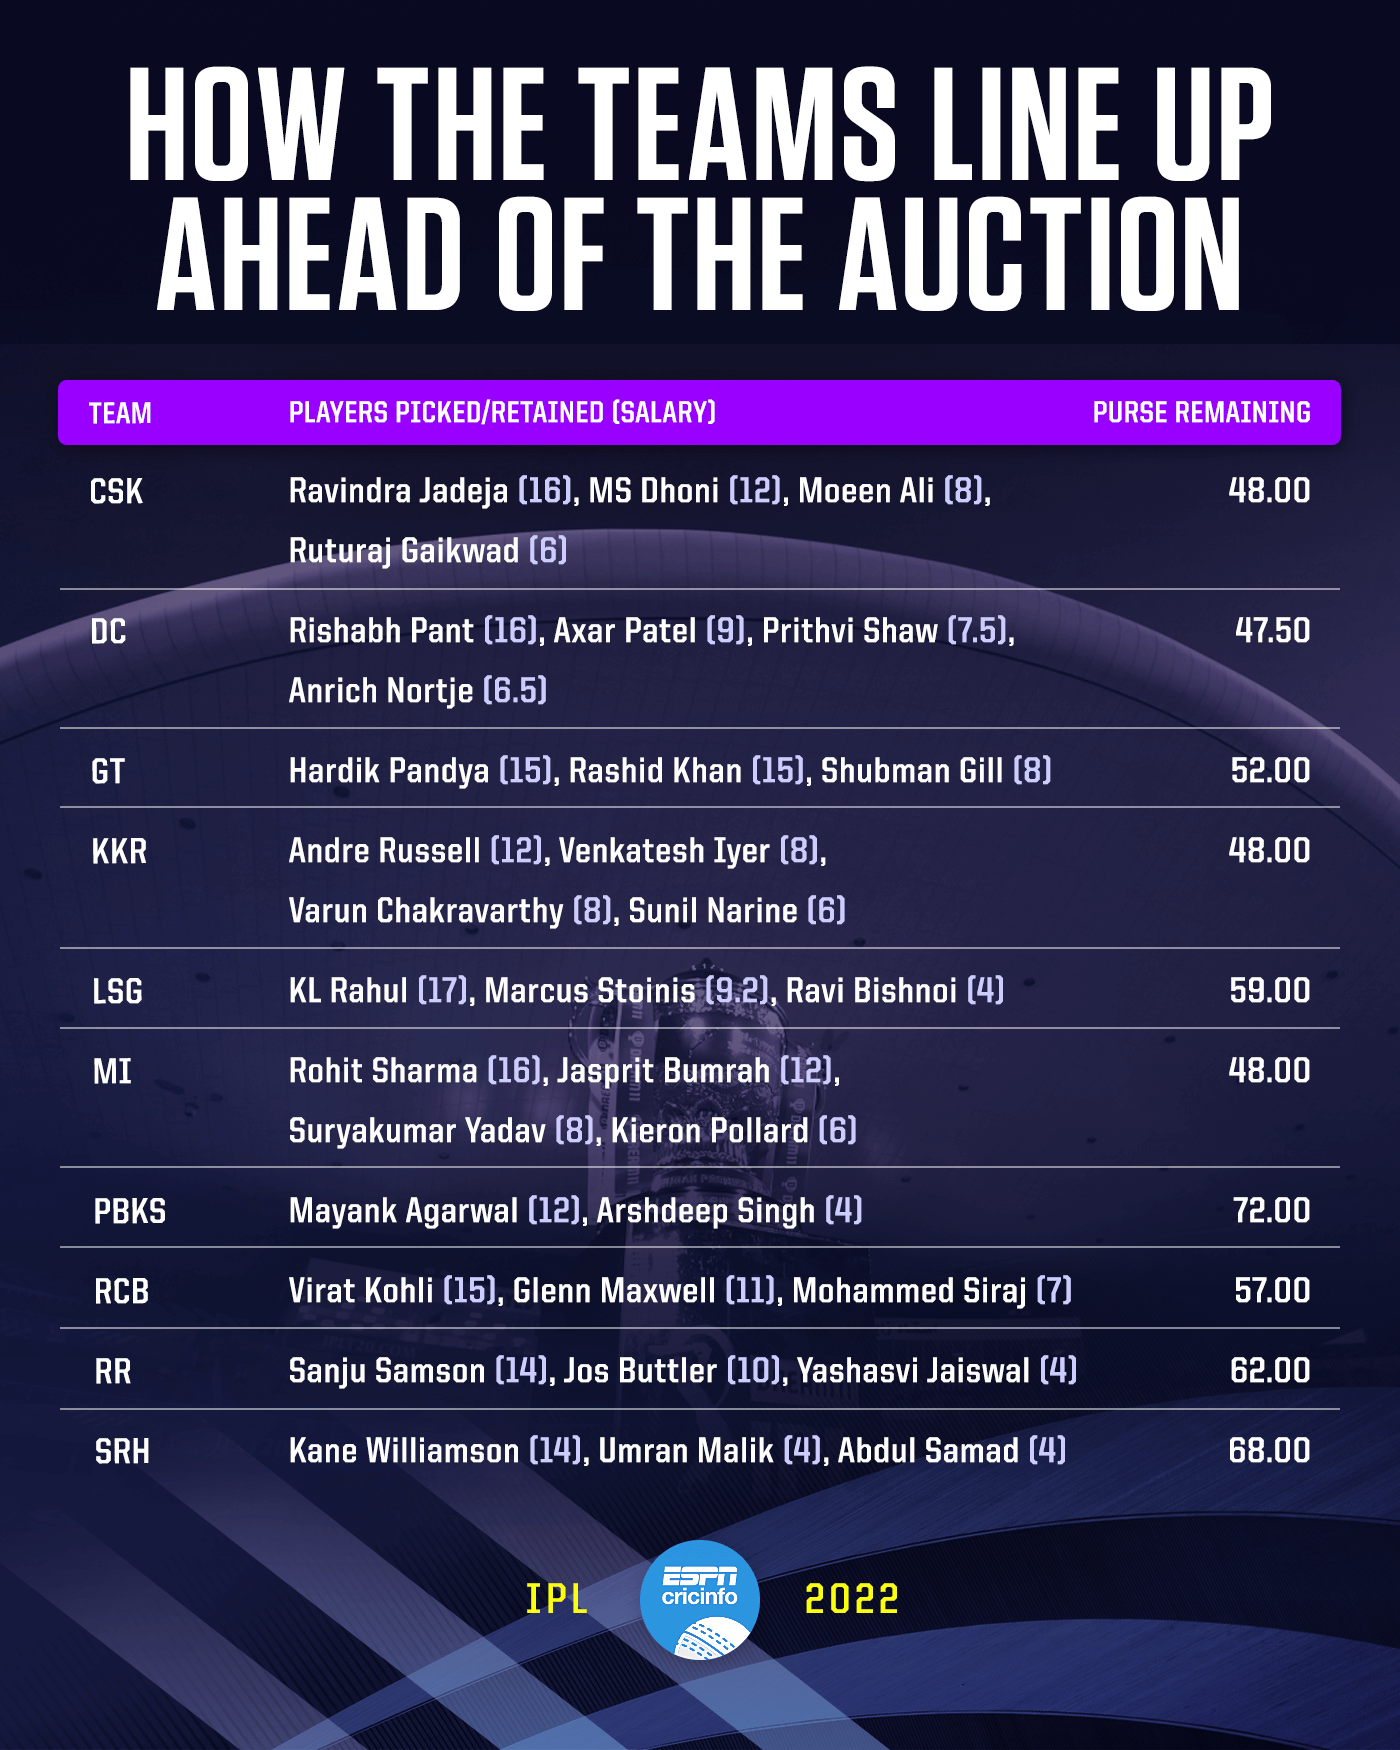 Ipl 2022 Schedule Faqs - All You Wanted To Know About The Ipl 2022 Auction